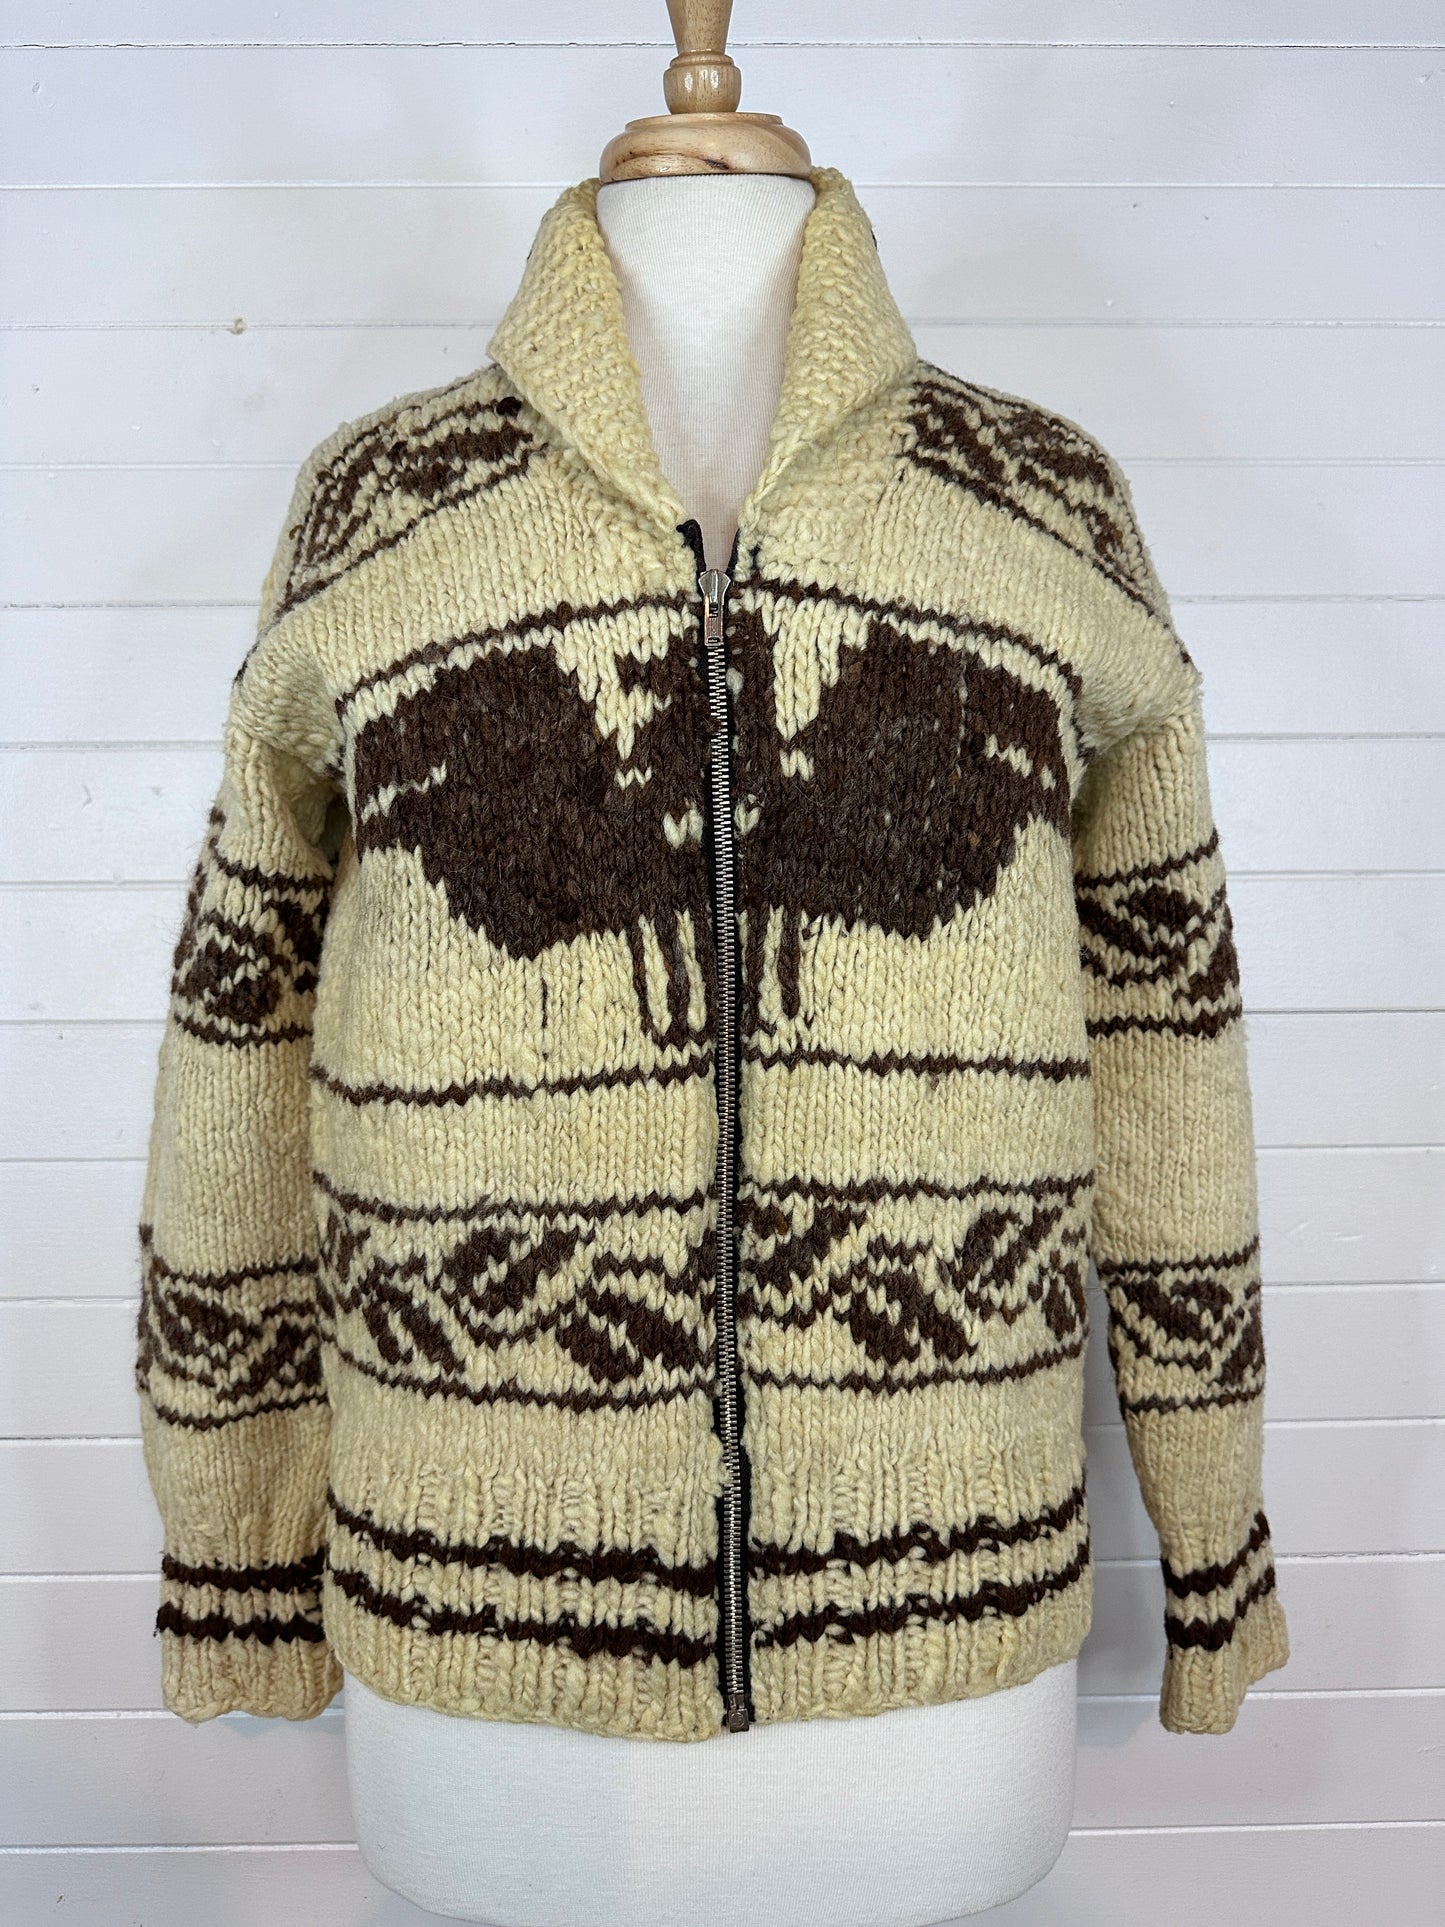 Authentic Cowichan Sweater - Ladies Small to Medium